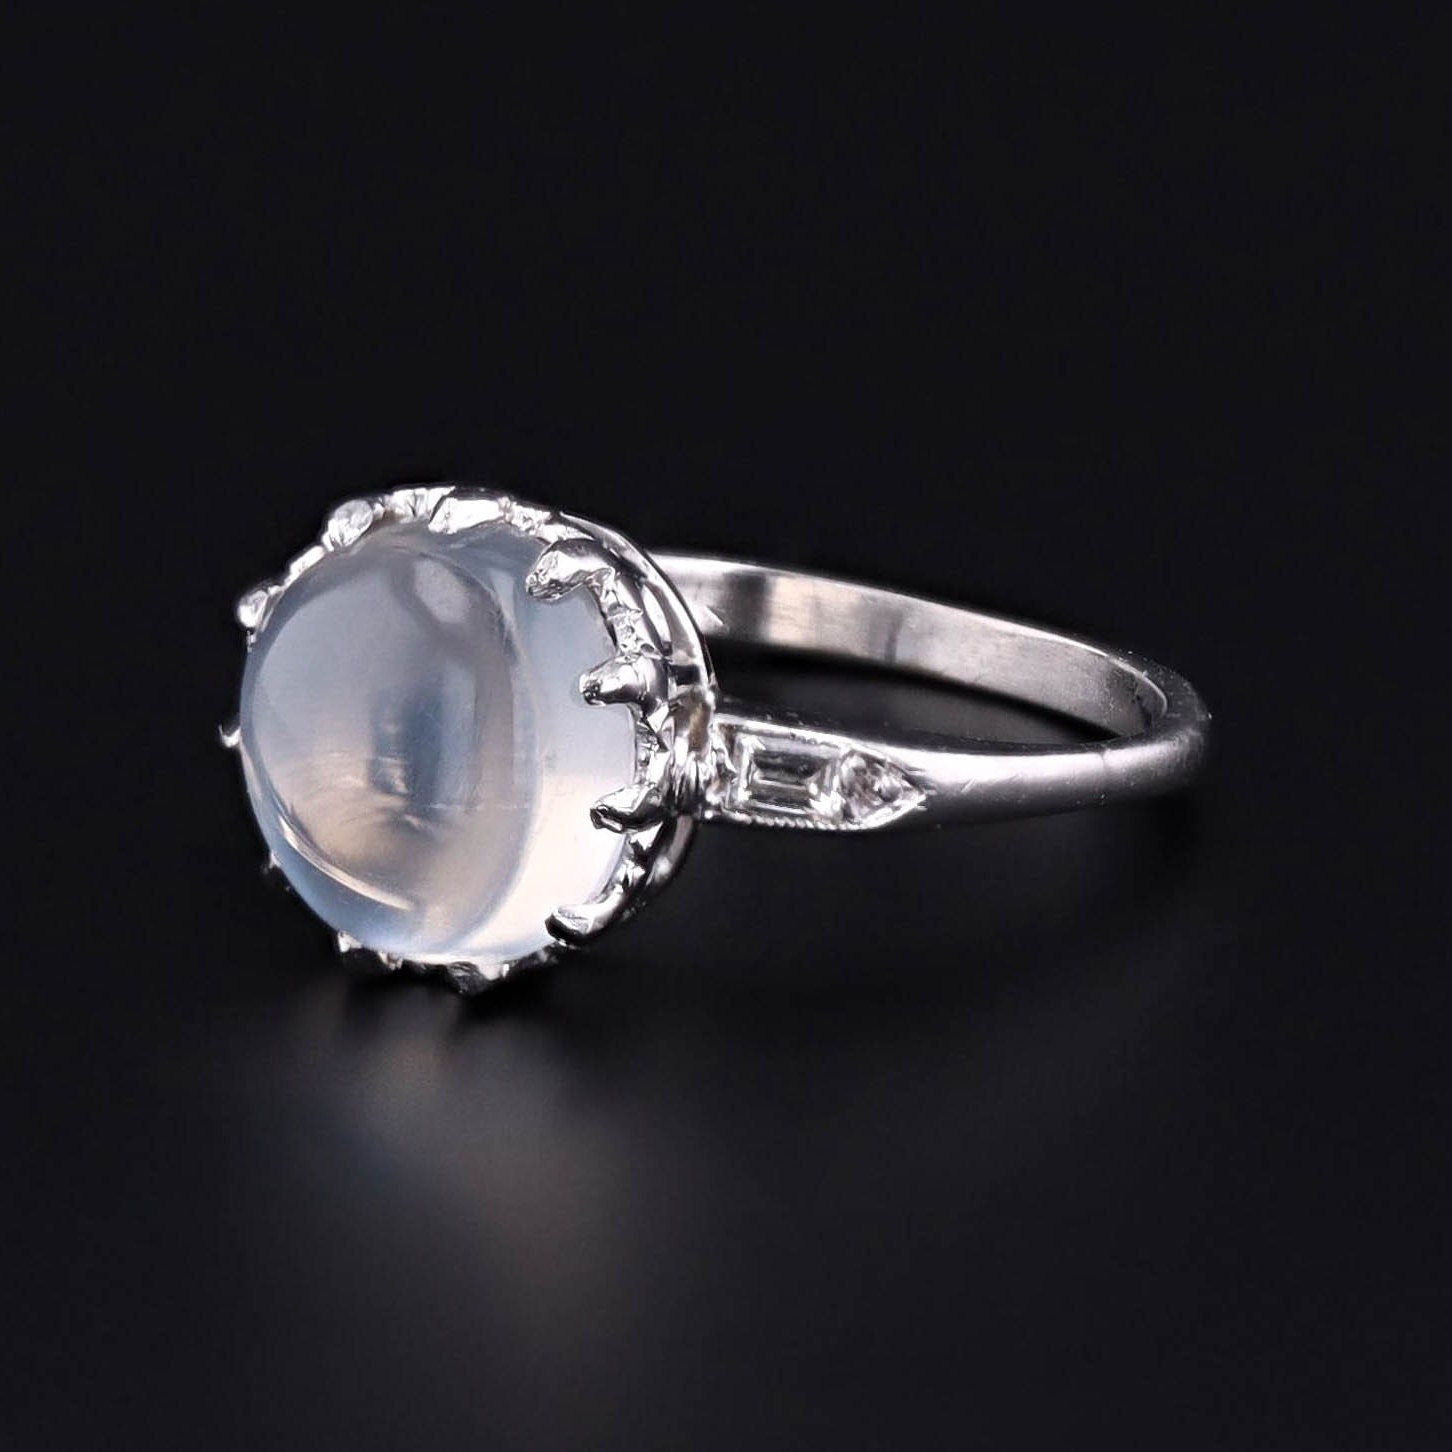 Vintage Silver Jewelry|sterling Silver Moonstone Engagement Ring - 10x14mm  Oval Gemstone, Vintage Party Band